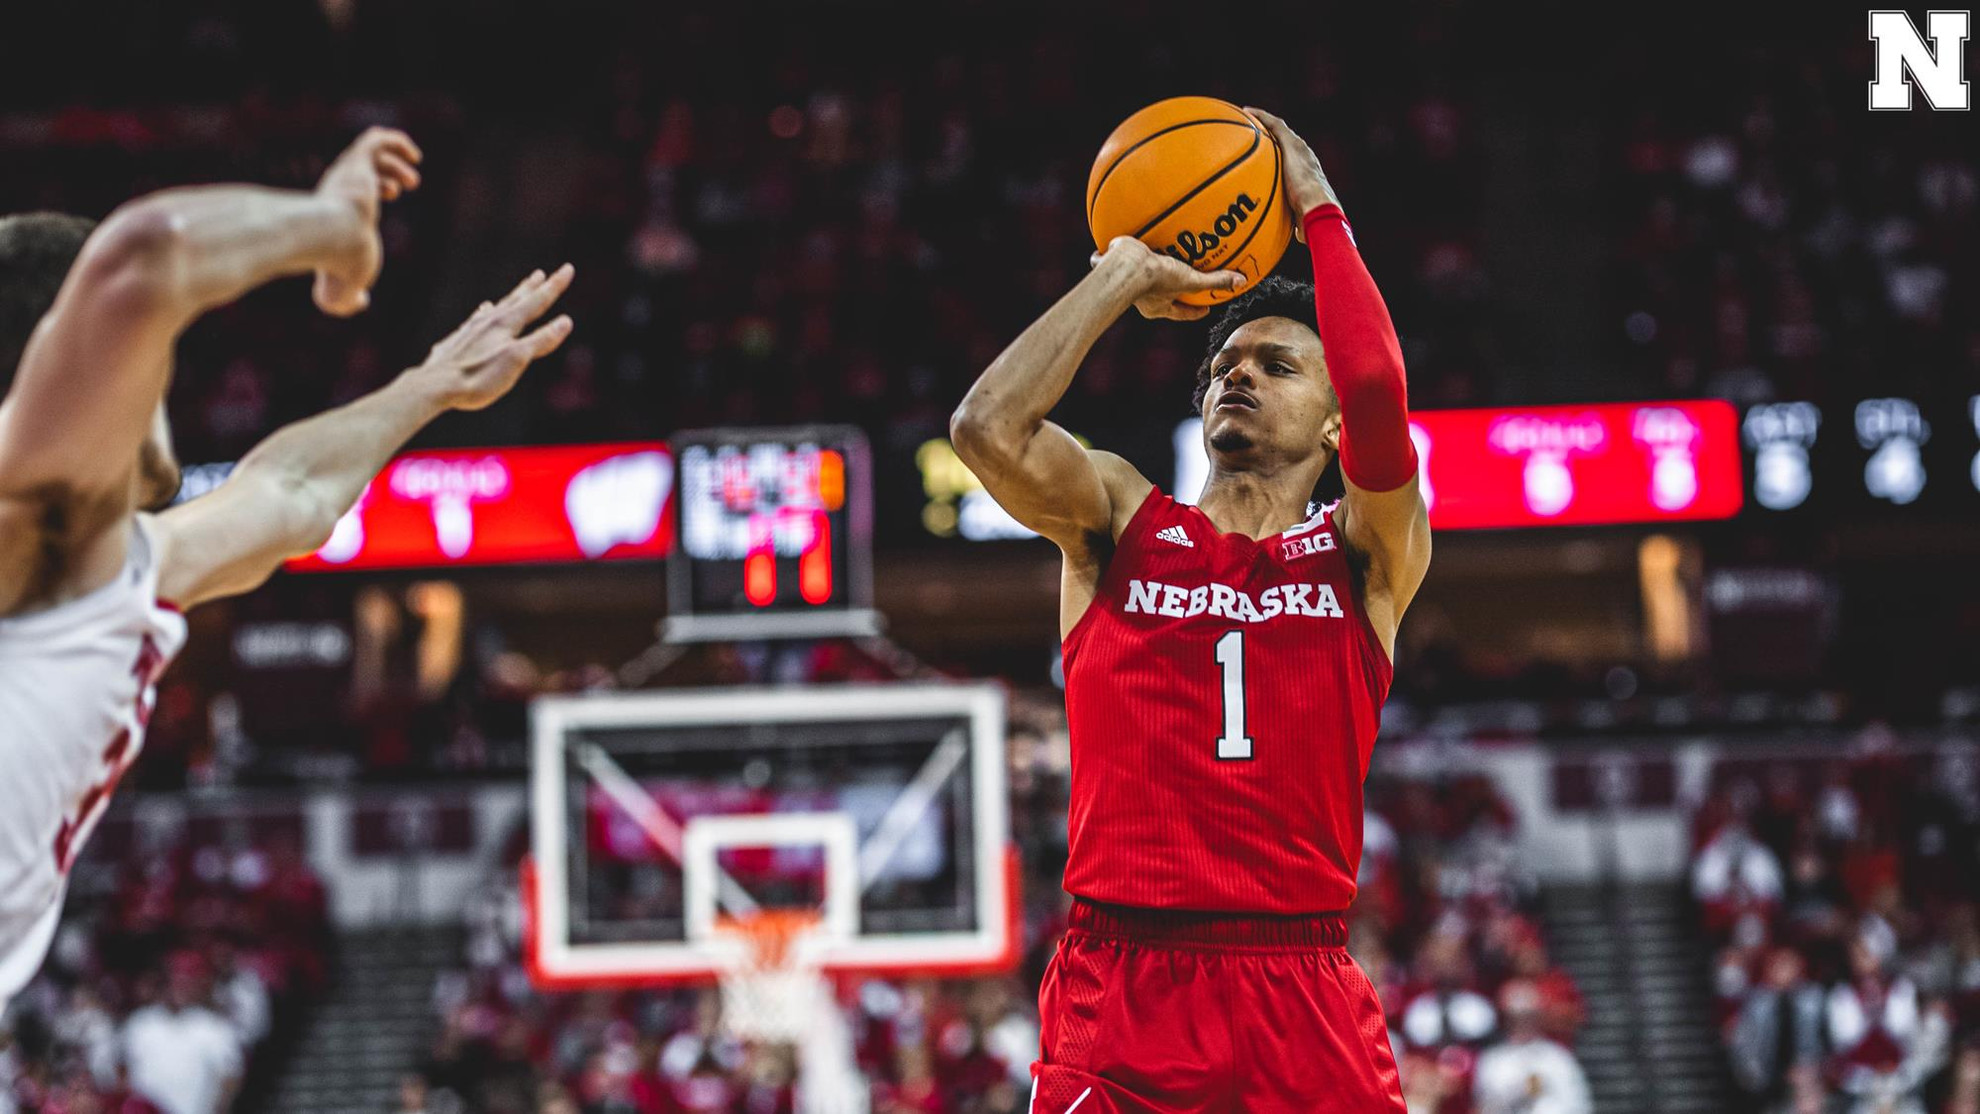 What to know about Wisconsin men's basketball's game at Nebraska